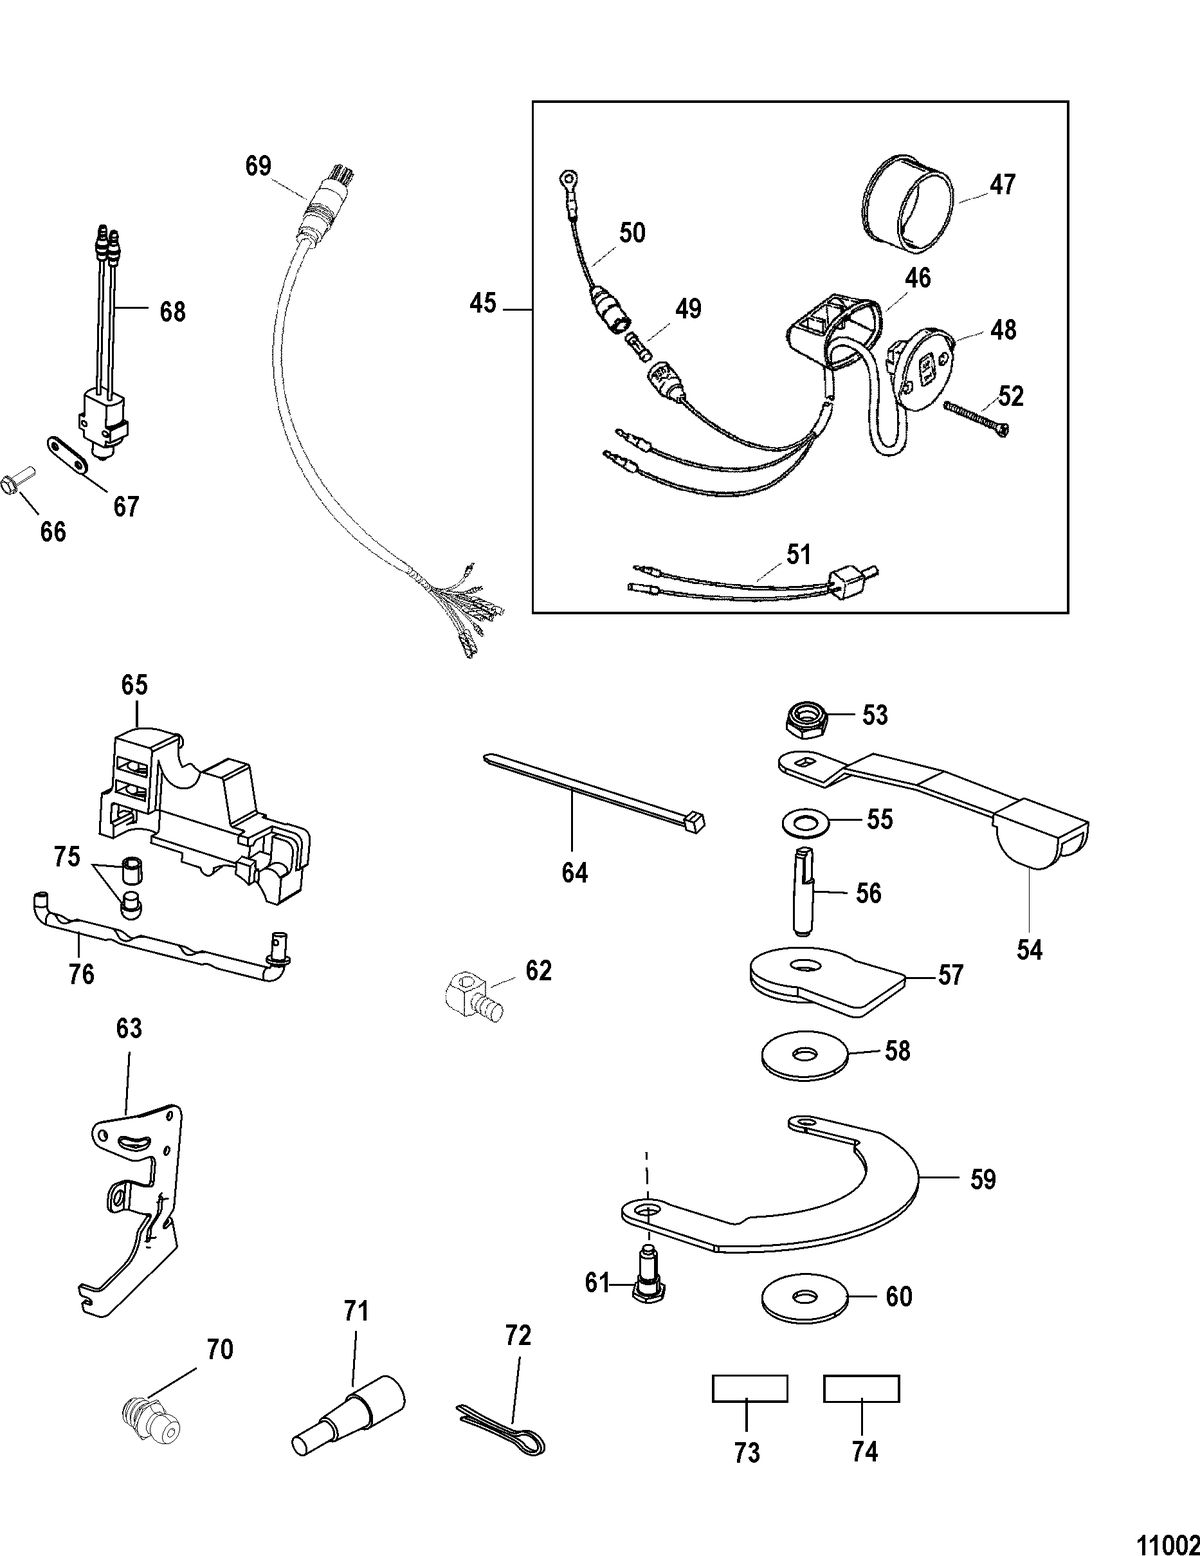 ACCESSORIES STEERING SYSTEMS AND COMPONENTS Tiller Handle Kit Components(828813A10 / A11 / A31)